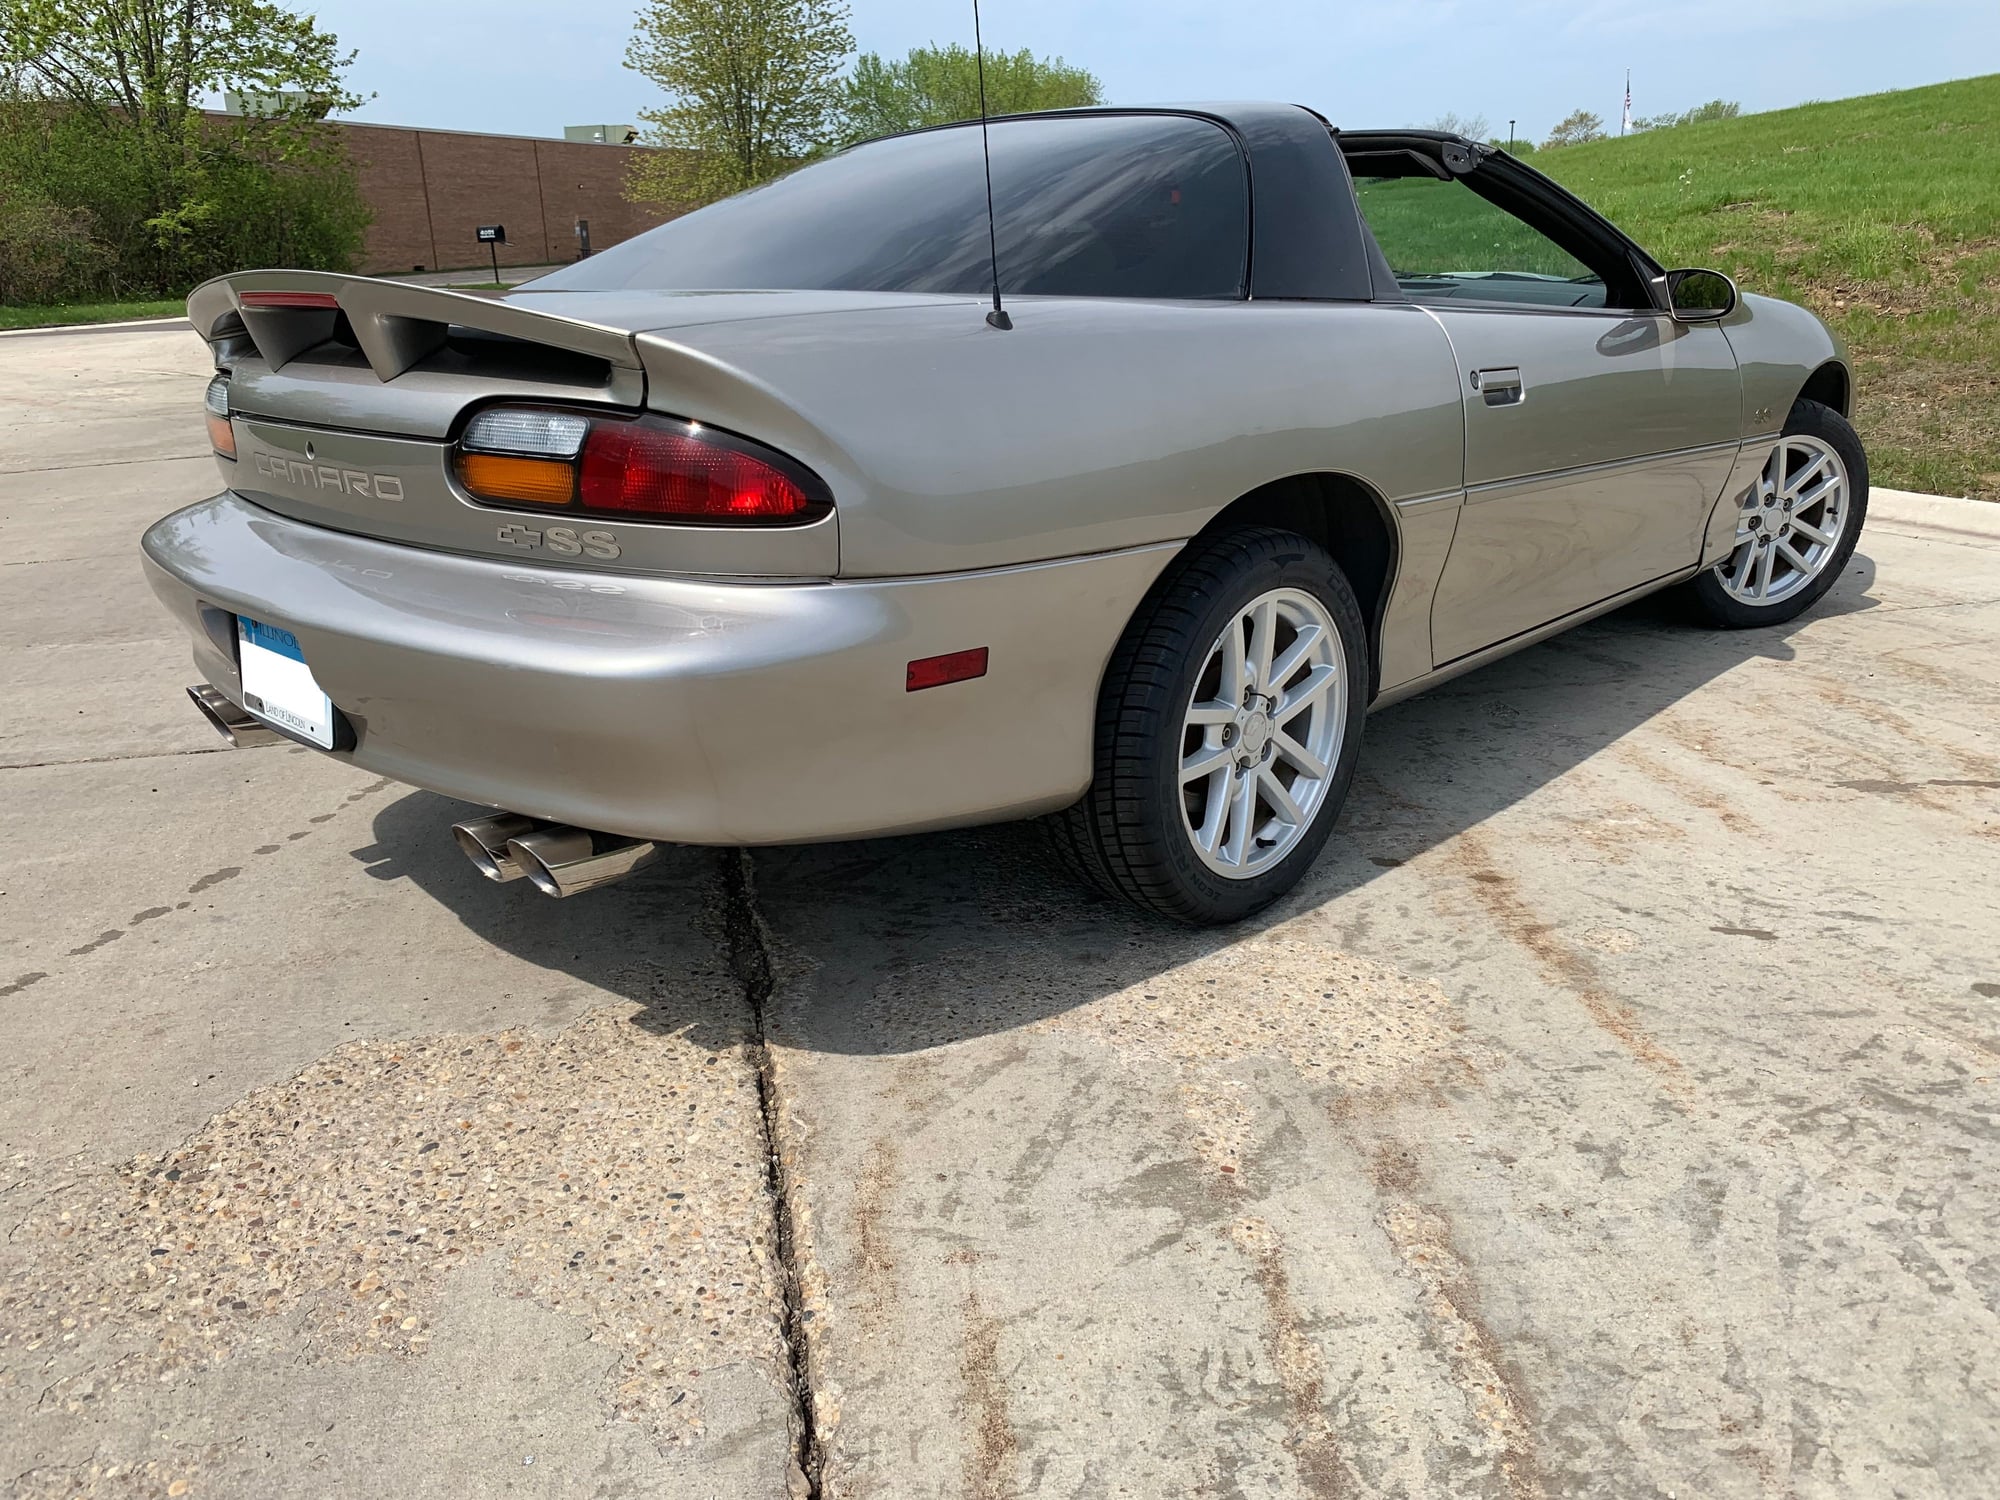 2001 Chevrolet Camaro - 2001 Camaro SS 6M Only 29K Miles! - Used - VIN 2G1FP22G612101841 - 29,800 Miles - 8 cyl - 2WD - Manual - Coupe - Other - Gurnee, IL 60031, United States